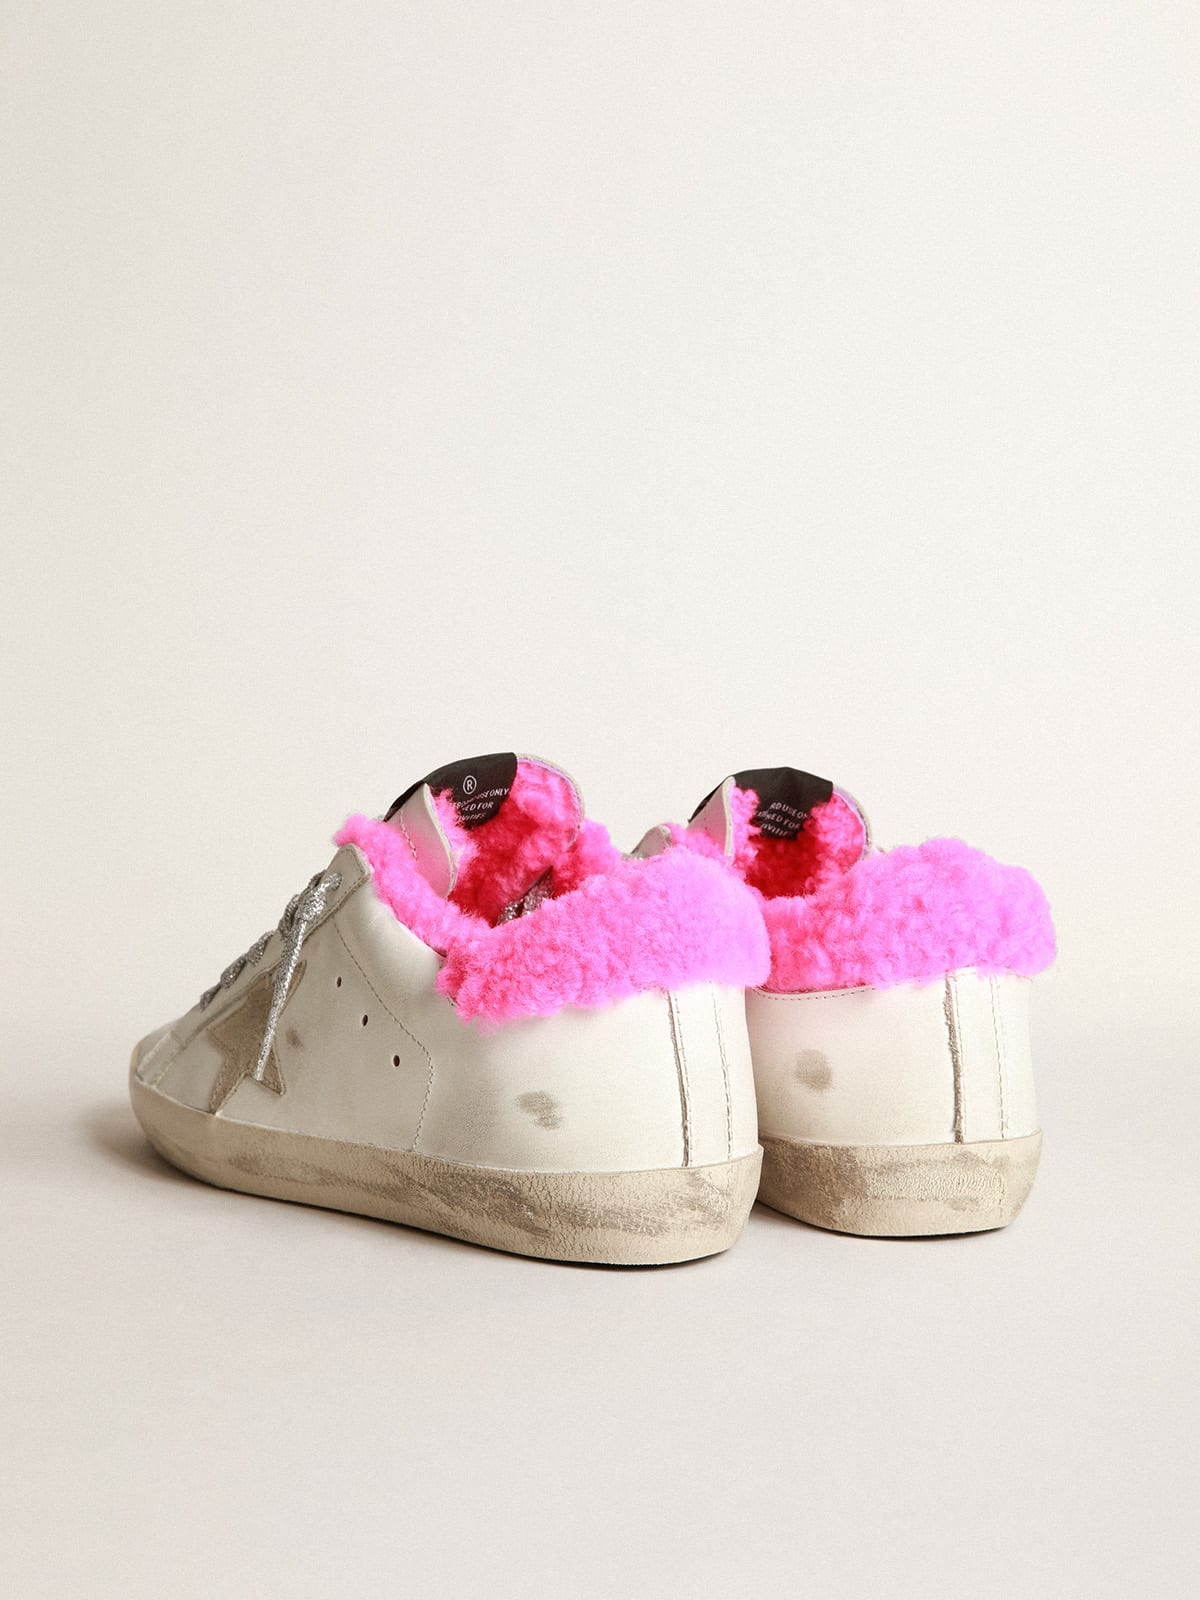 Golden Goose - Super-Star sneakers with fuchsia shearling lining and ice-gray suede star in 